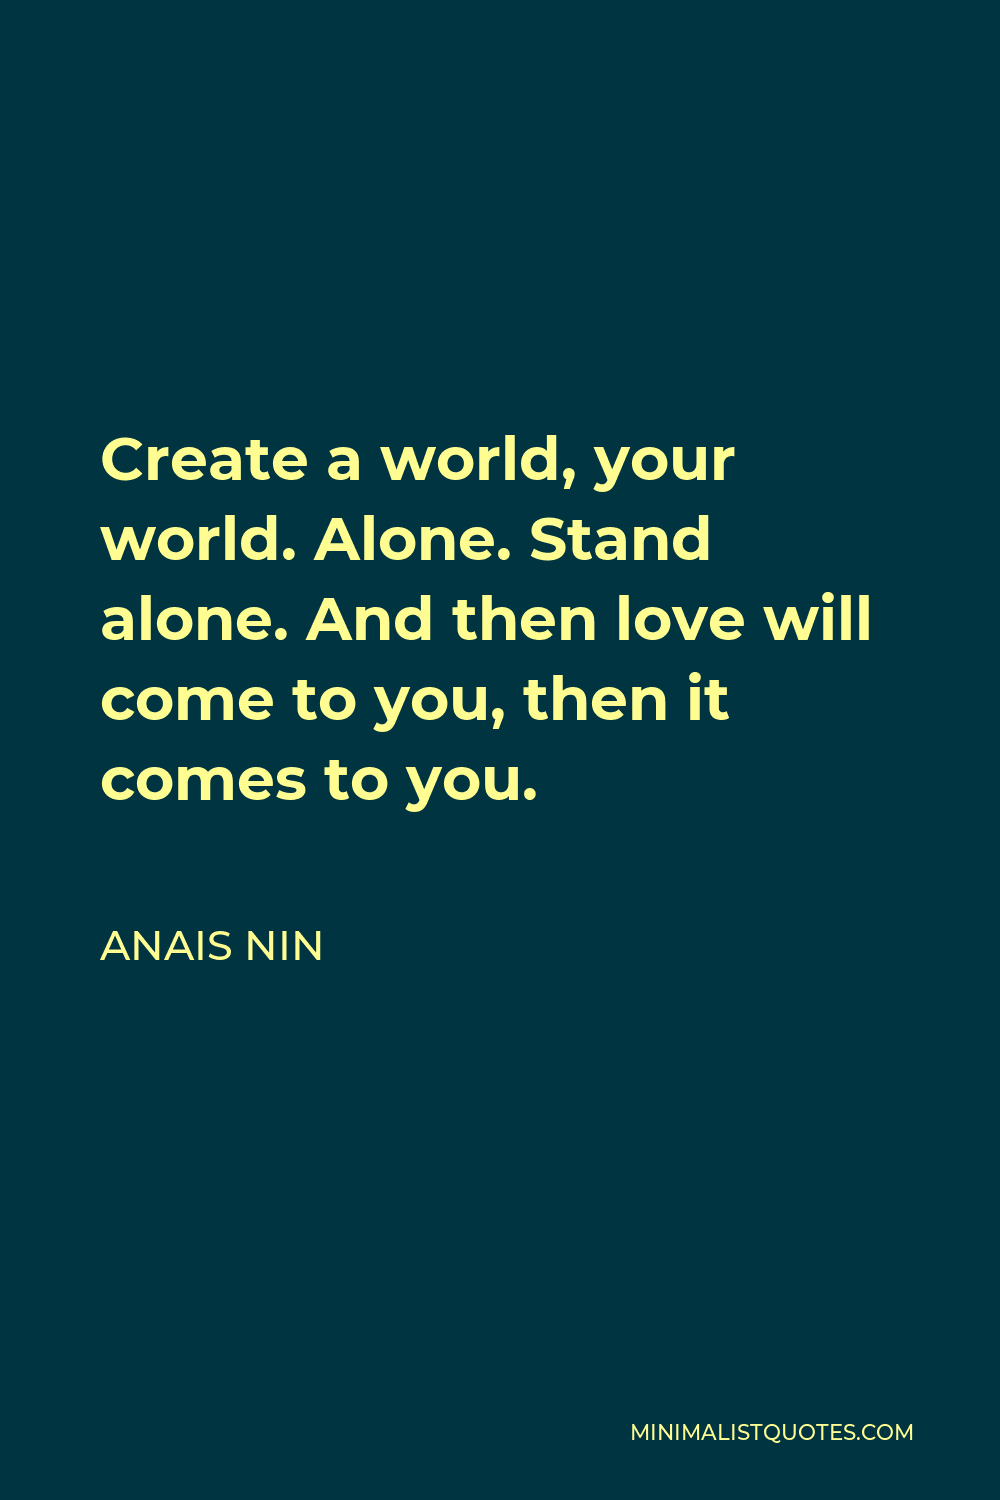 Anais Nin Quote - Create a world, your world. Alone. Stand alone. And then love will come to you, then it comes to you.